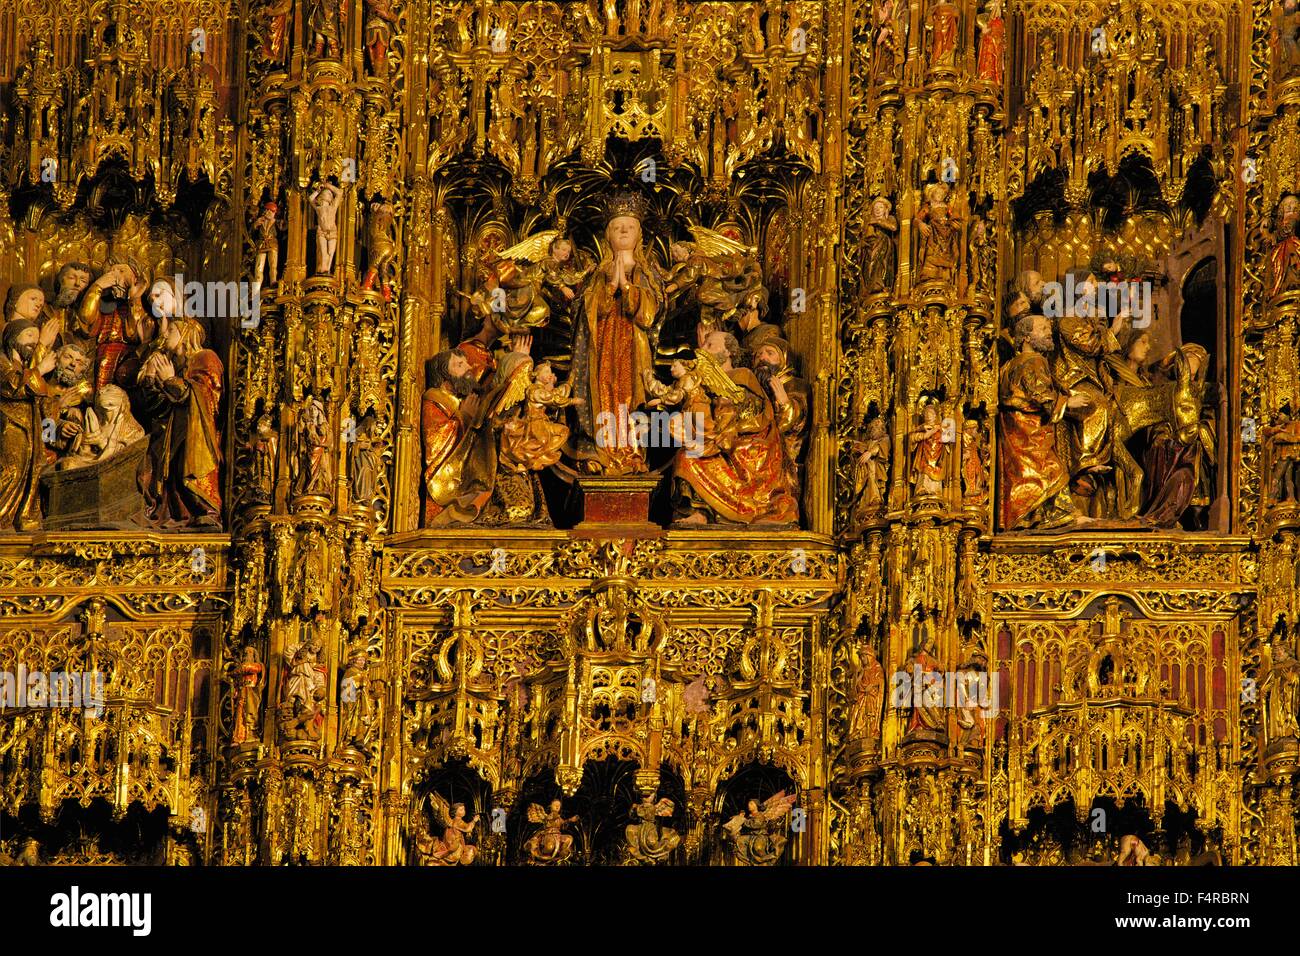 Retablo Mayor, reredos gilded relief panels, Seville Cathedral, Catedral Sevilla, Andalucia, Spain, Europe Stock Photo